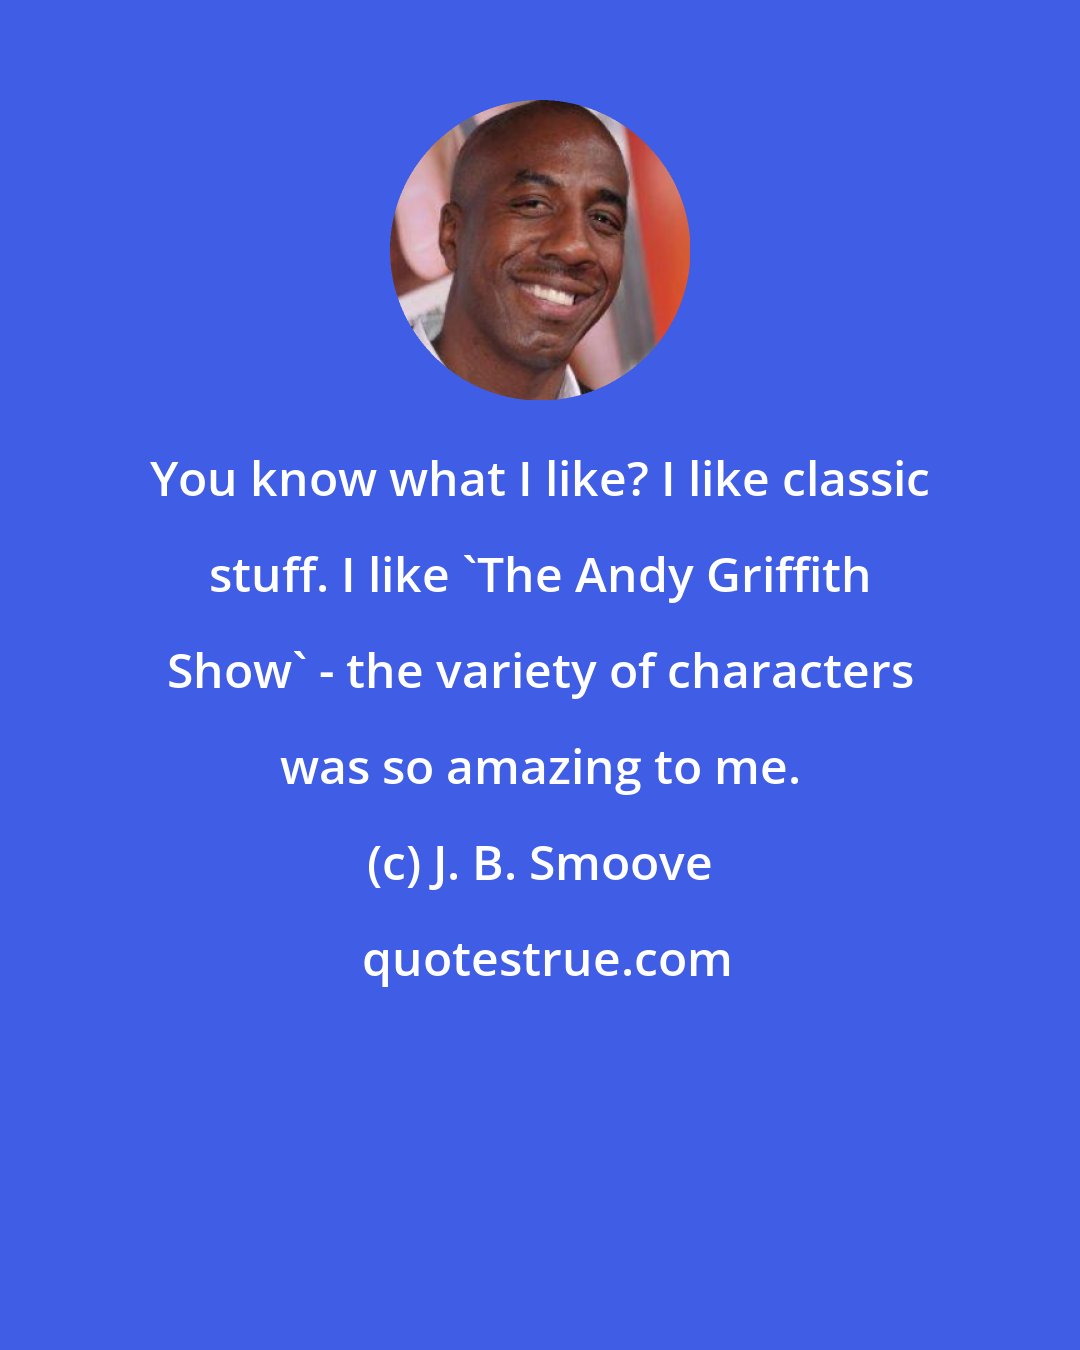 J. B. Smoove: You know what I like? I like classic stuff. I like 'The Andy Griffith Show' - the variety of characters was so amazing to me.